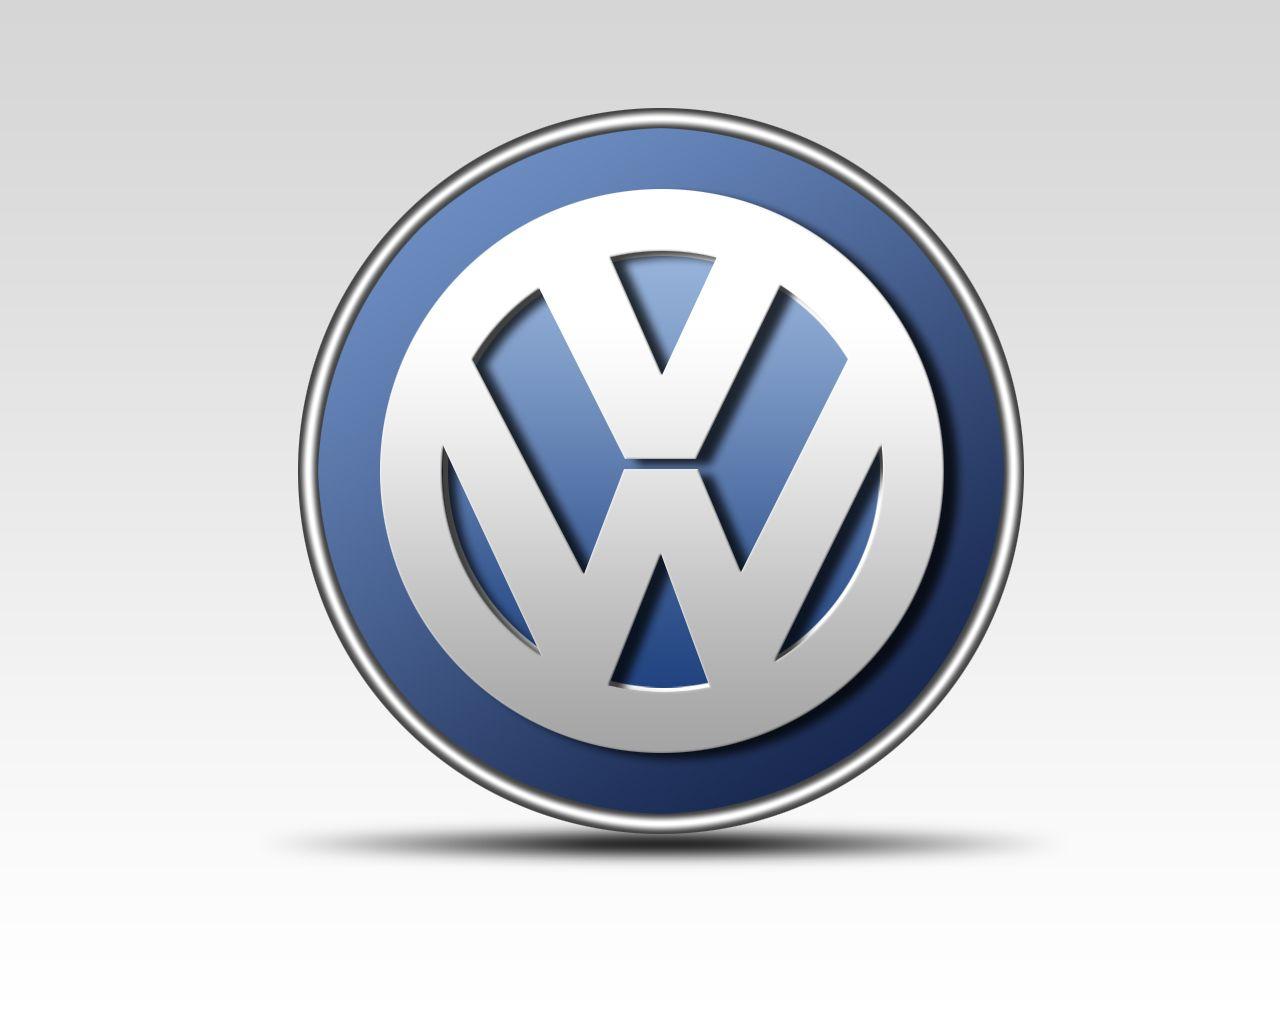 Blue and White Car Logo - Volkswagen Logo, Volkswagen Car Symbol Meaning and History. Car